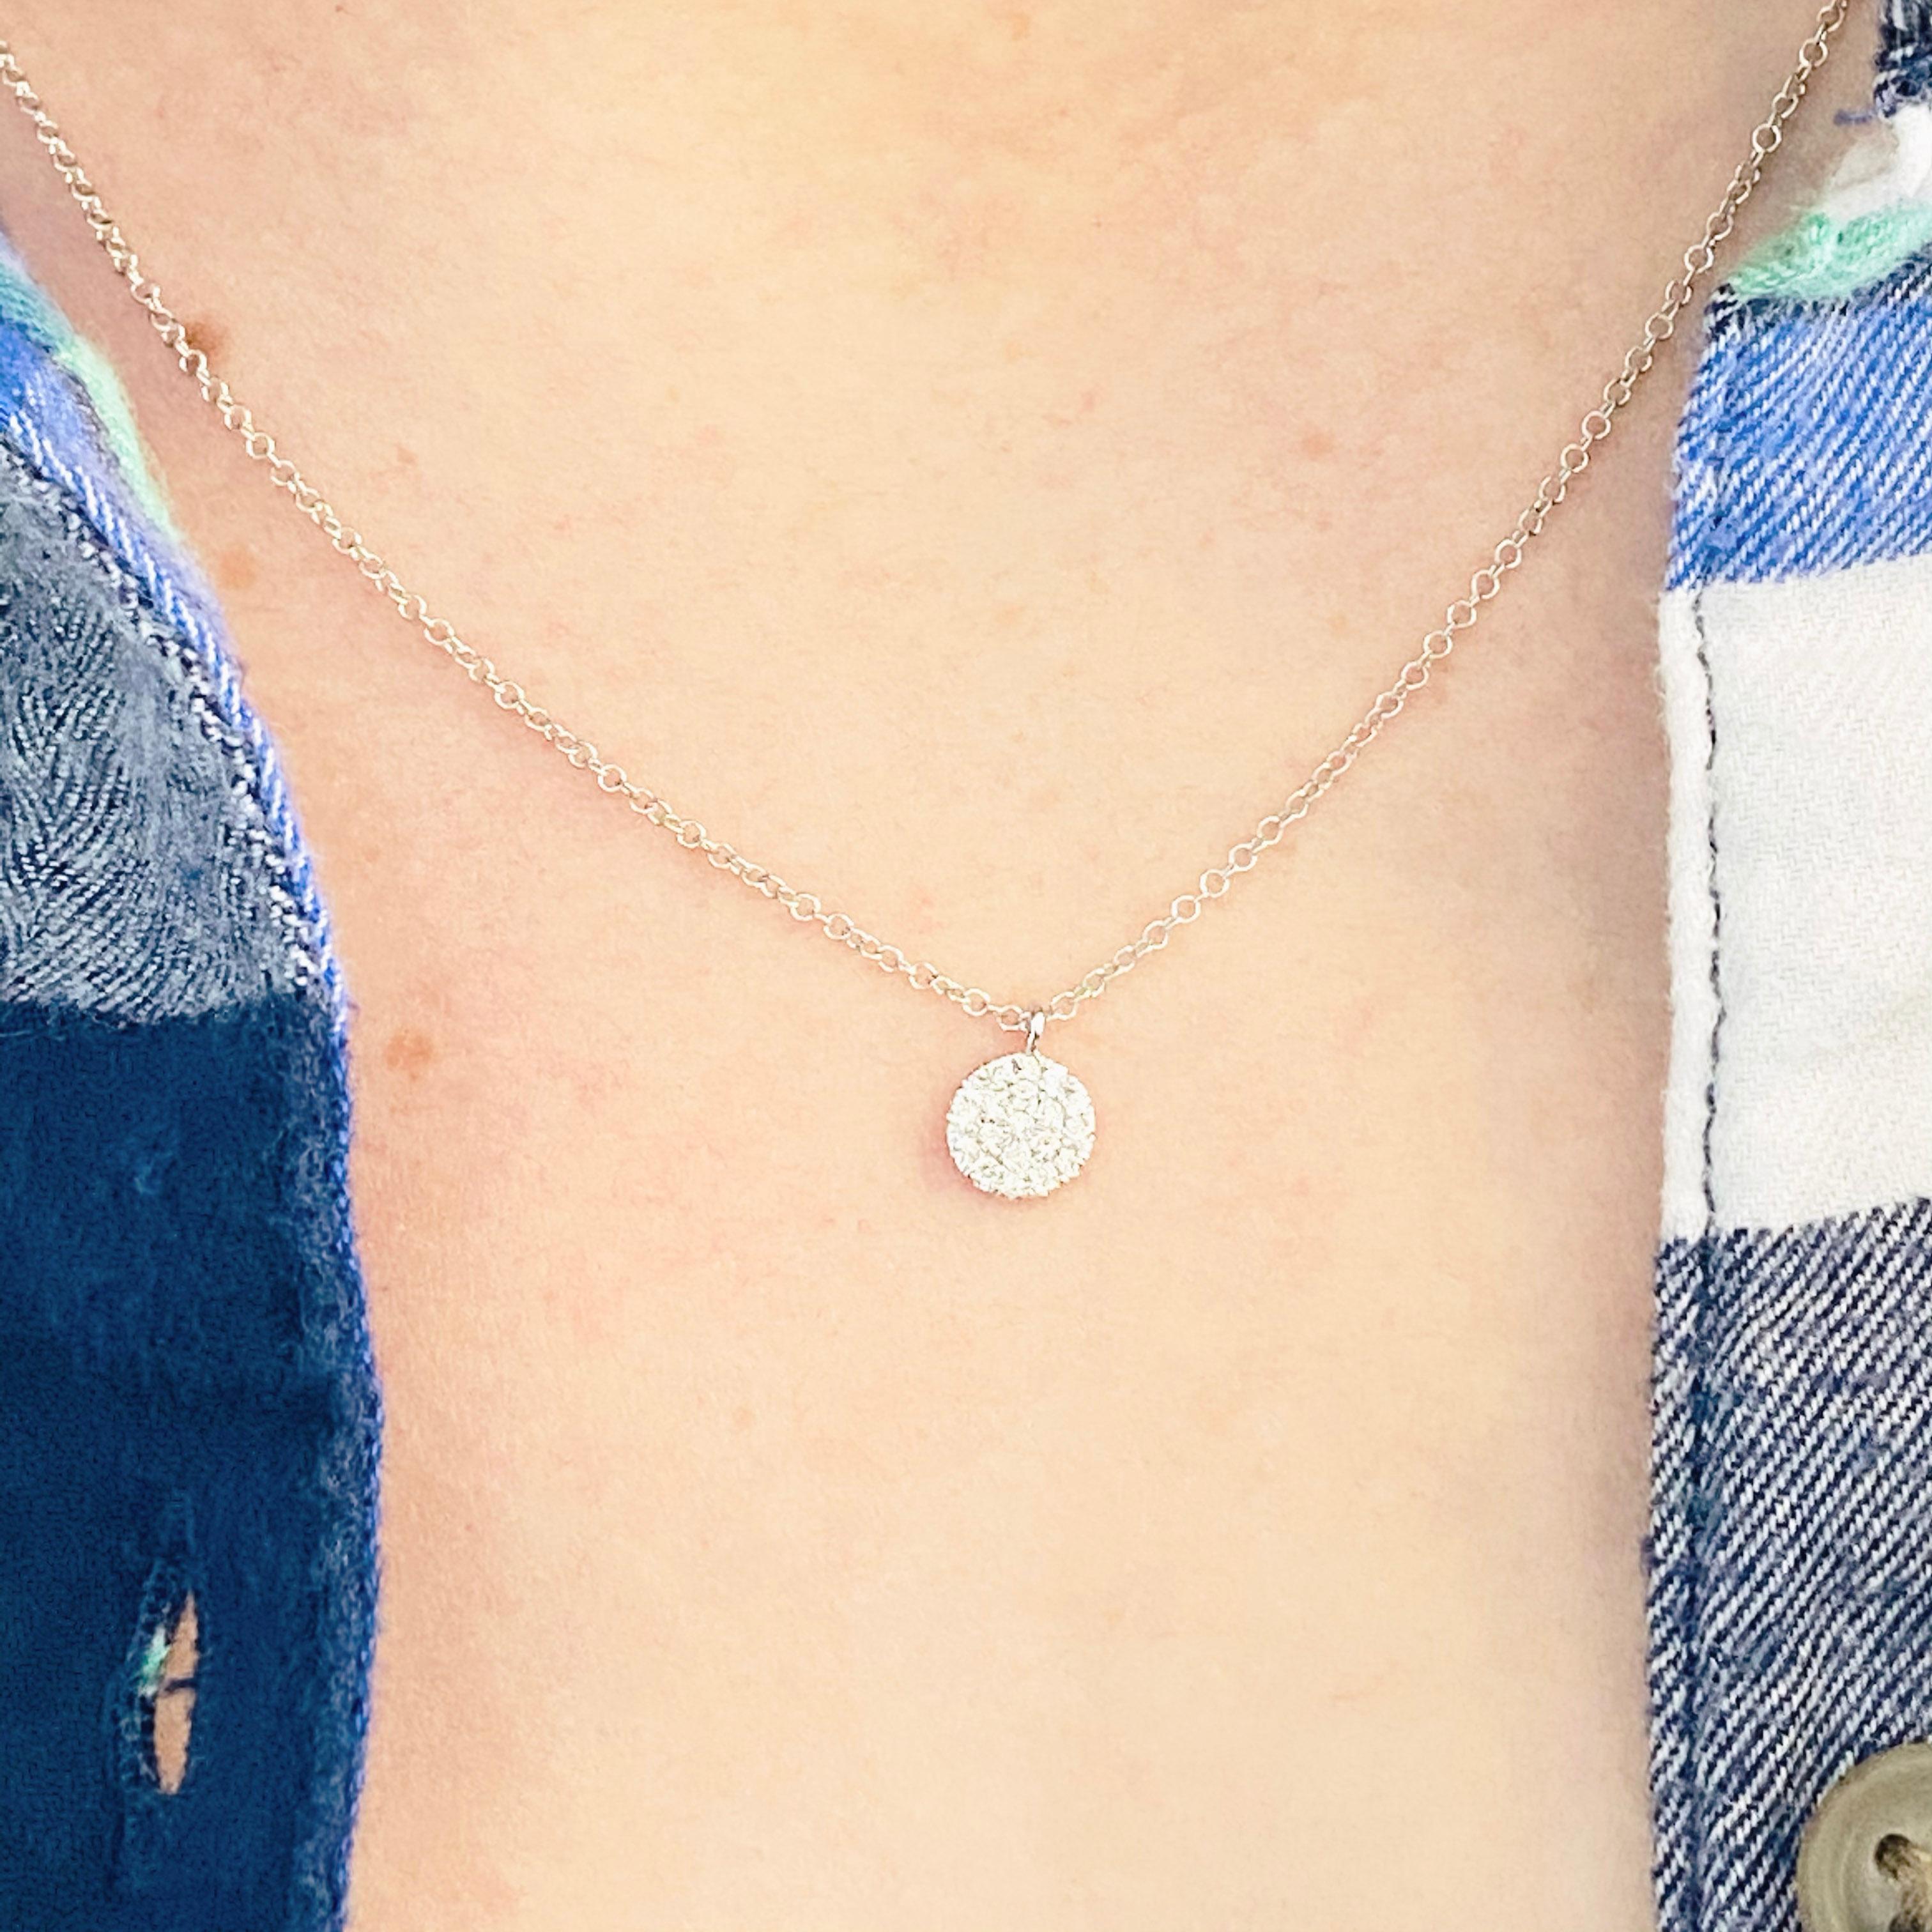 This gorgeous 14k white gold disk pendant with pave diamonds is sure to put a smile on anyone's face! This necklace looks beautiful worn by itself and also looks wonderful in a necklace stack. This necklace would make a wonderful gift for your loved